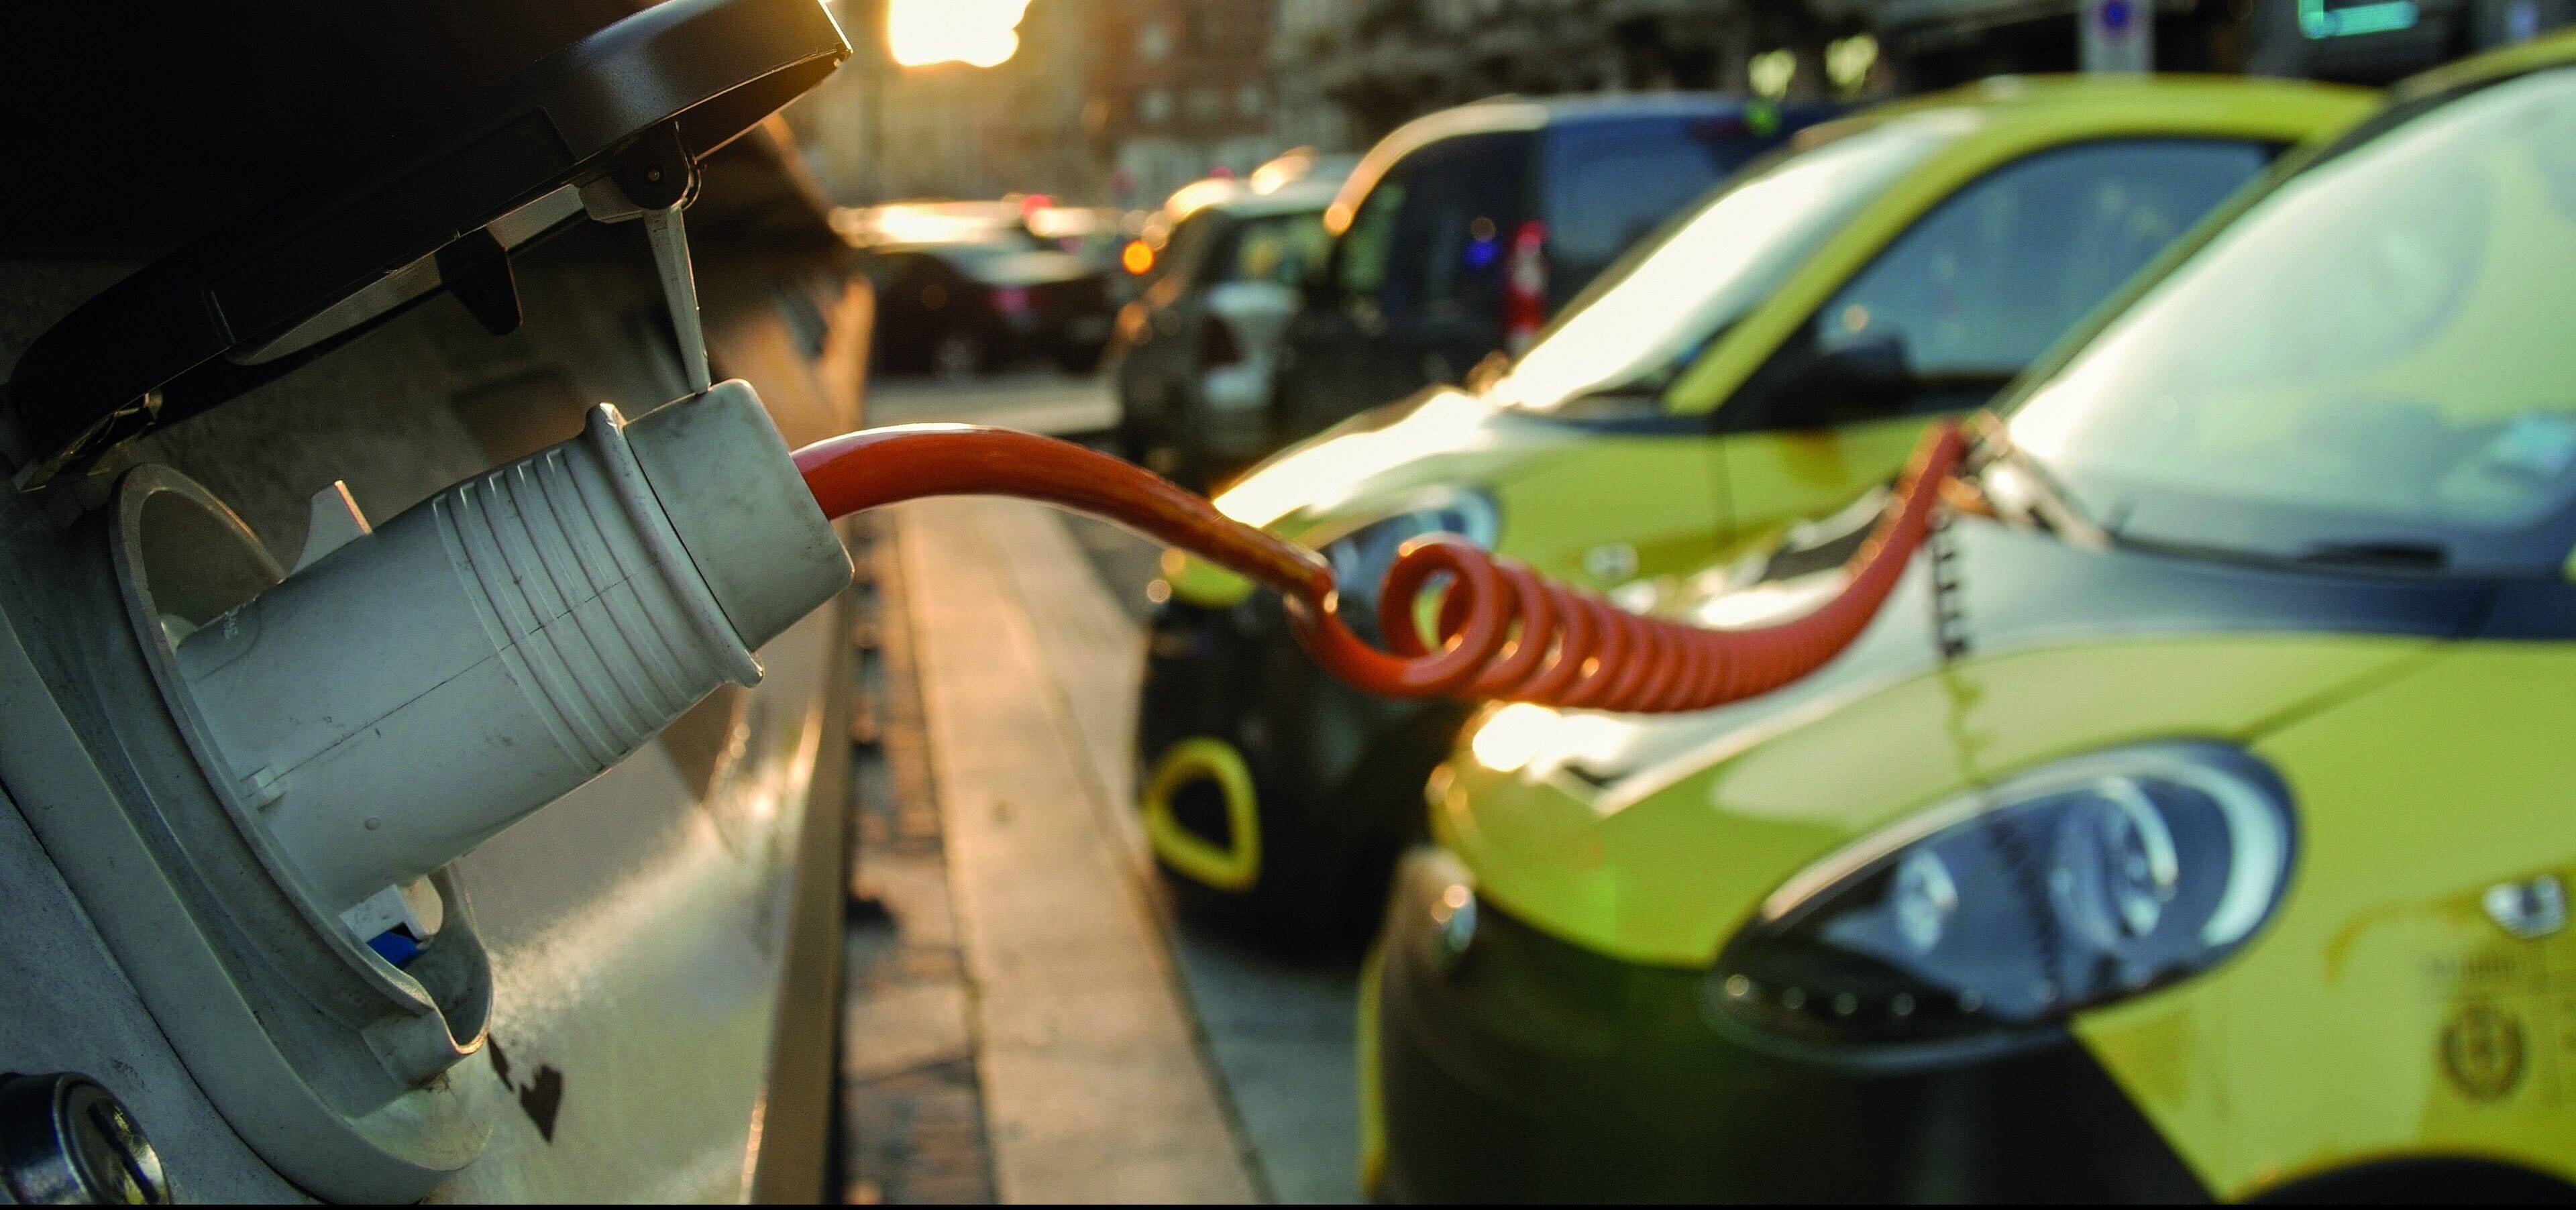 Up to 3m EV charge points may be needed by 2040